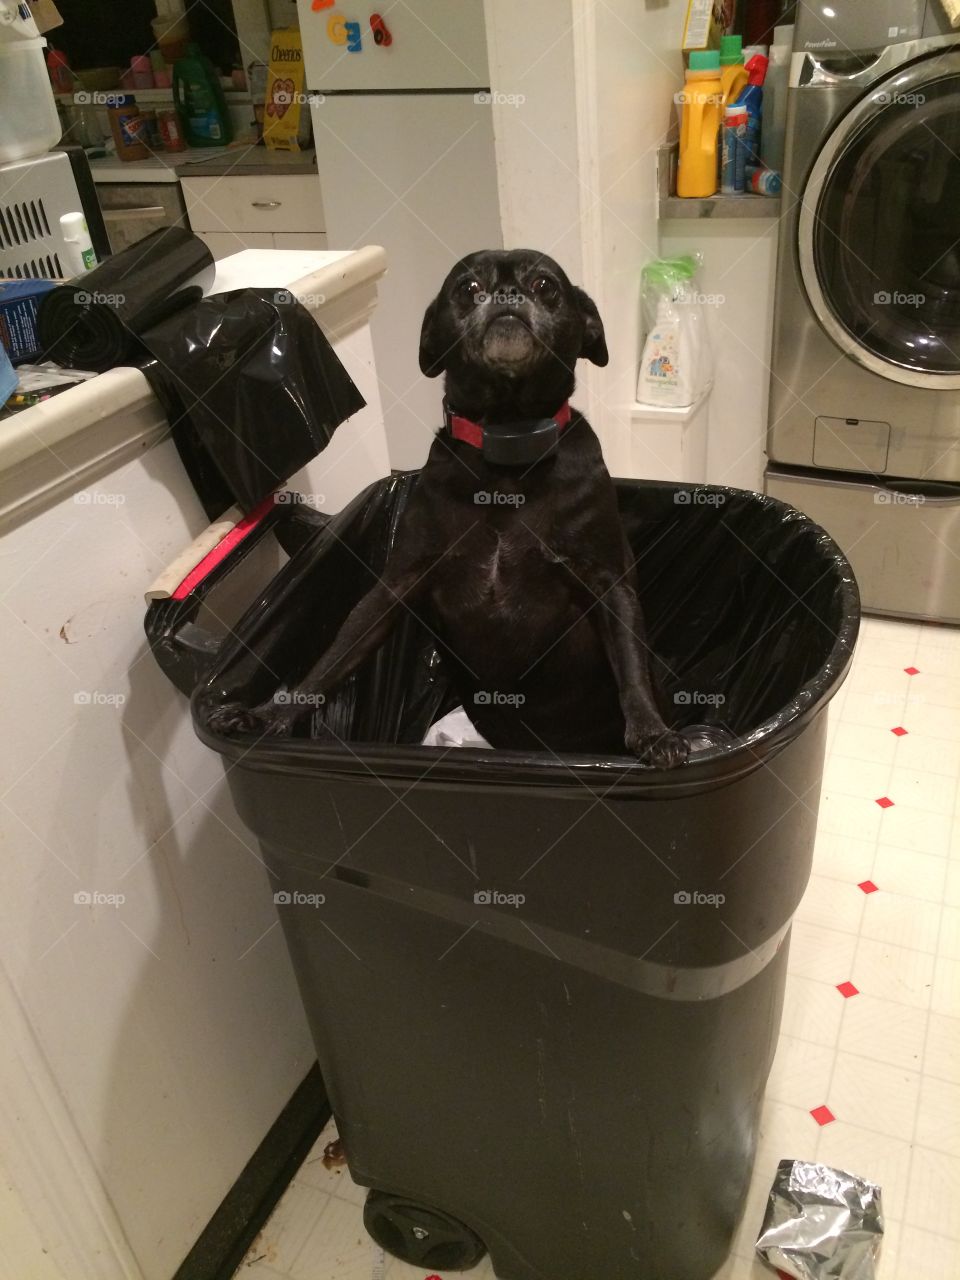 Dog jumped in trash can, black dog, chug breed, looks guilty